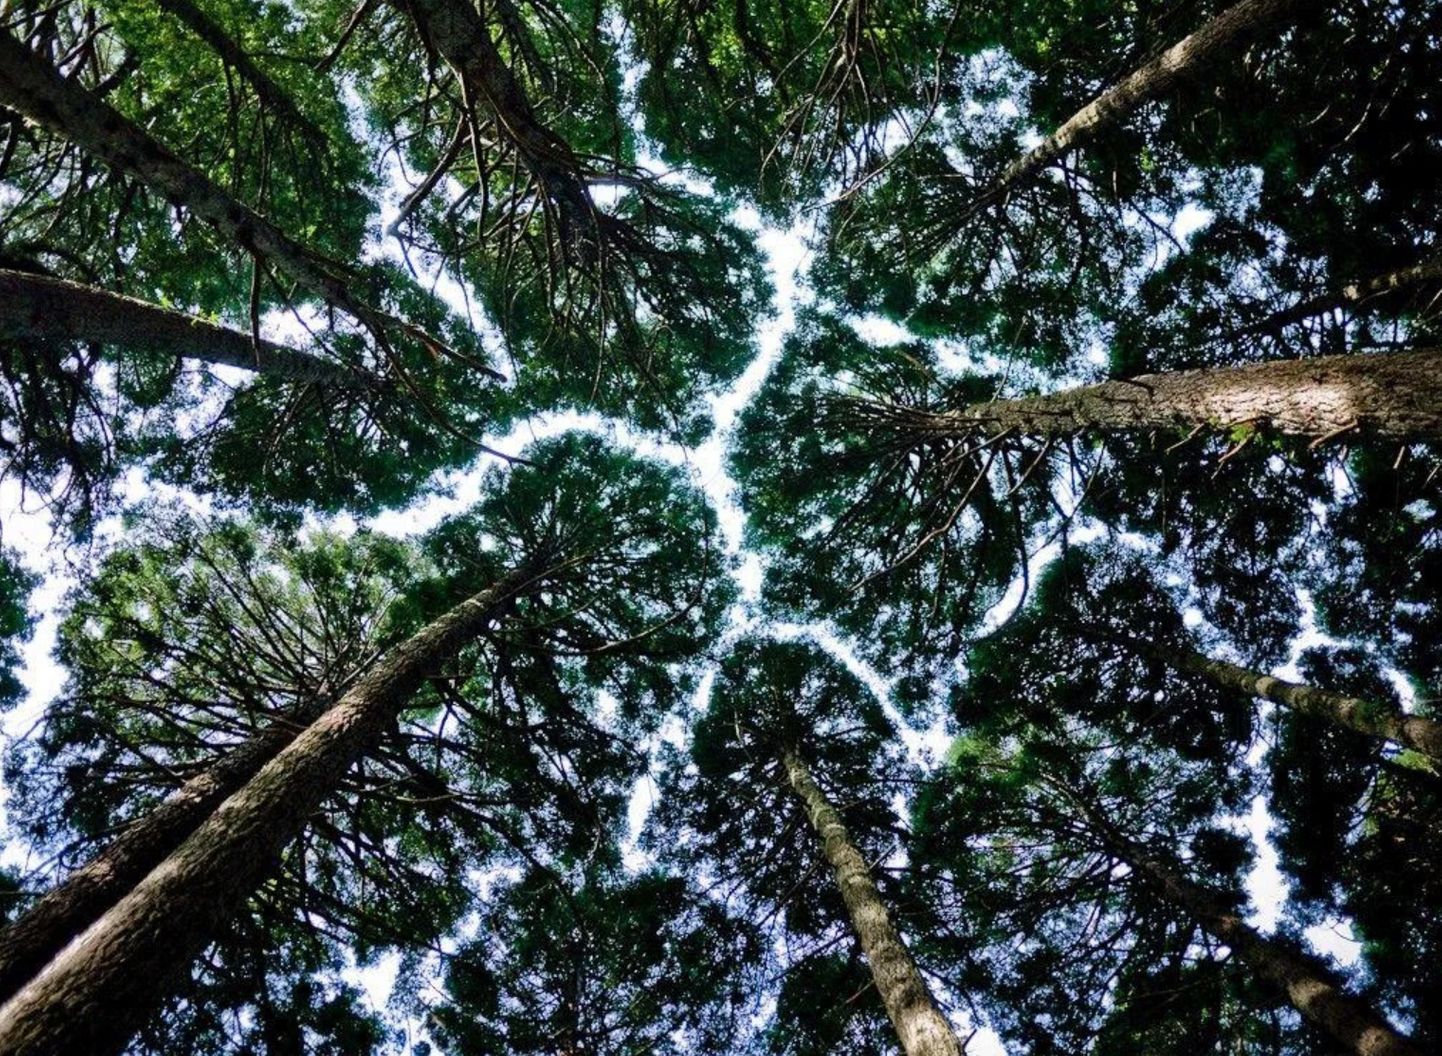 Strange Secrets: Have you ever seen the canopies in the wood like these?